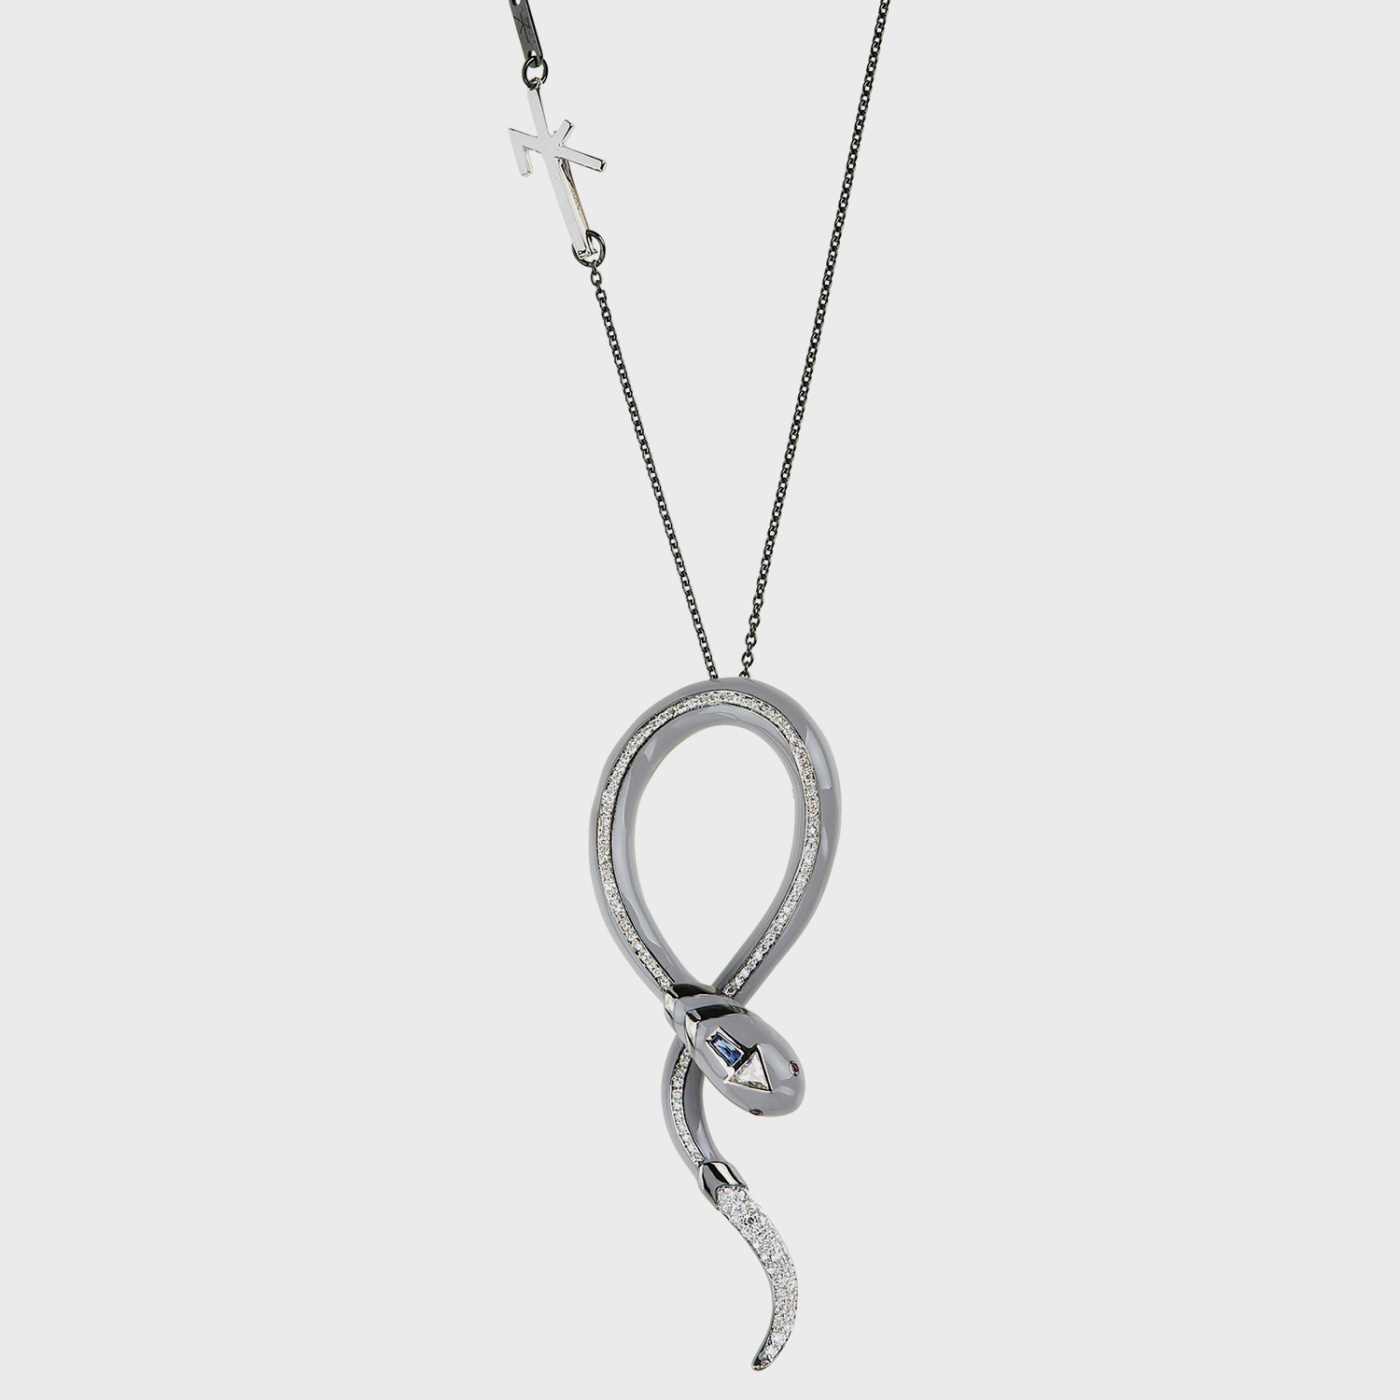 White gold snake pendant necklace with white diamonds blue sapphires, ruby and grey enamel